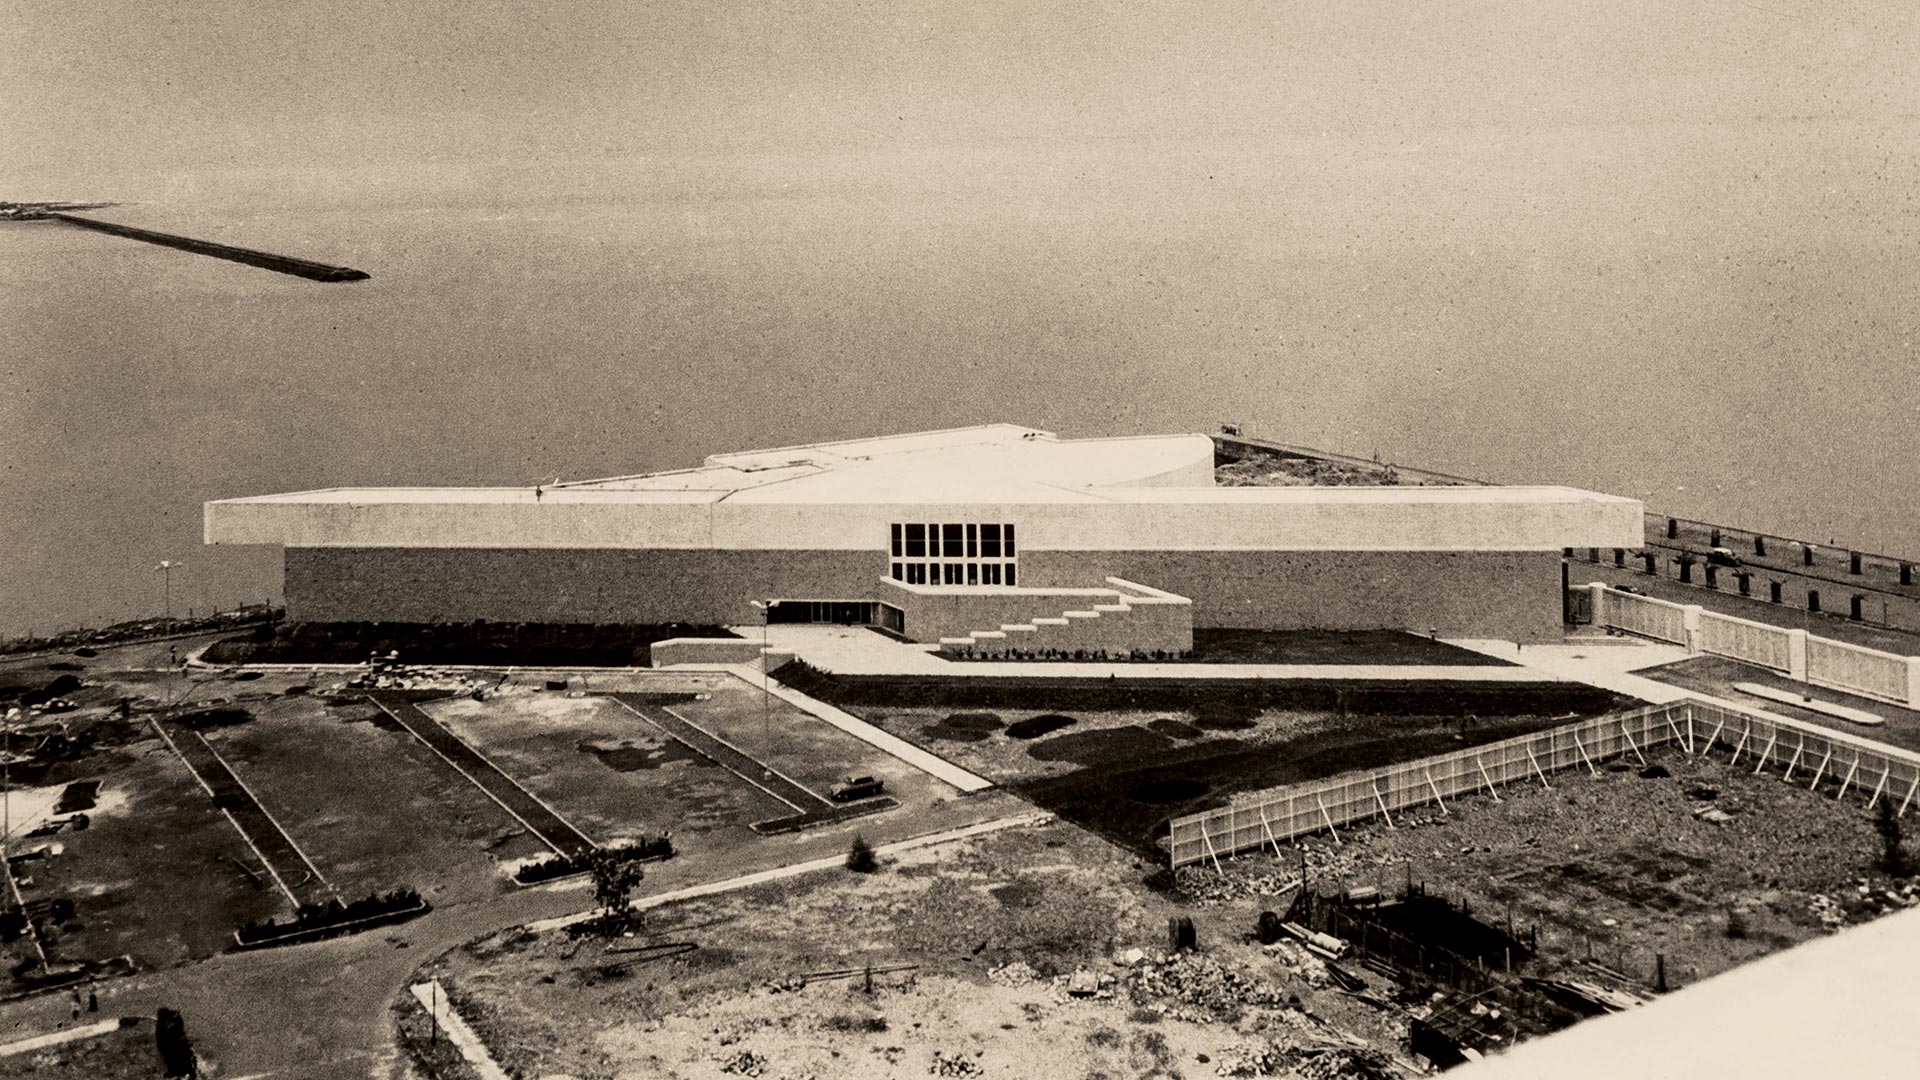 The Tata Theatre under construction on land reclaimed from the sea (1976)